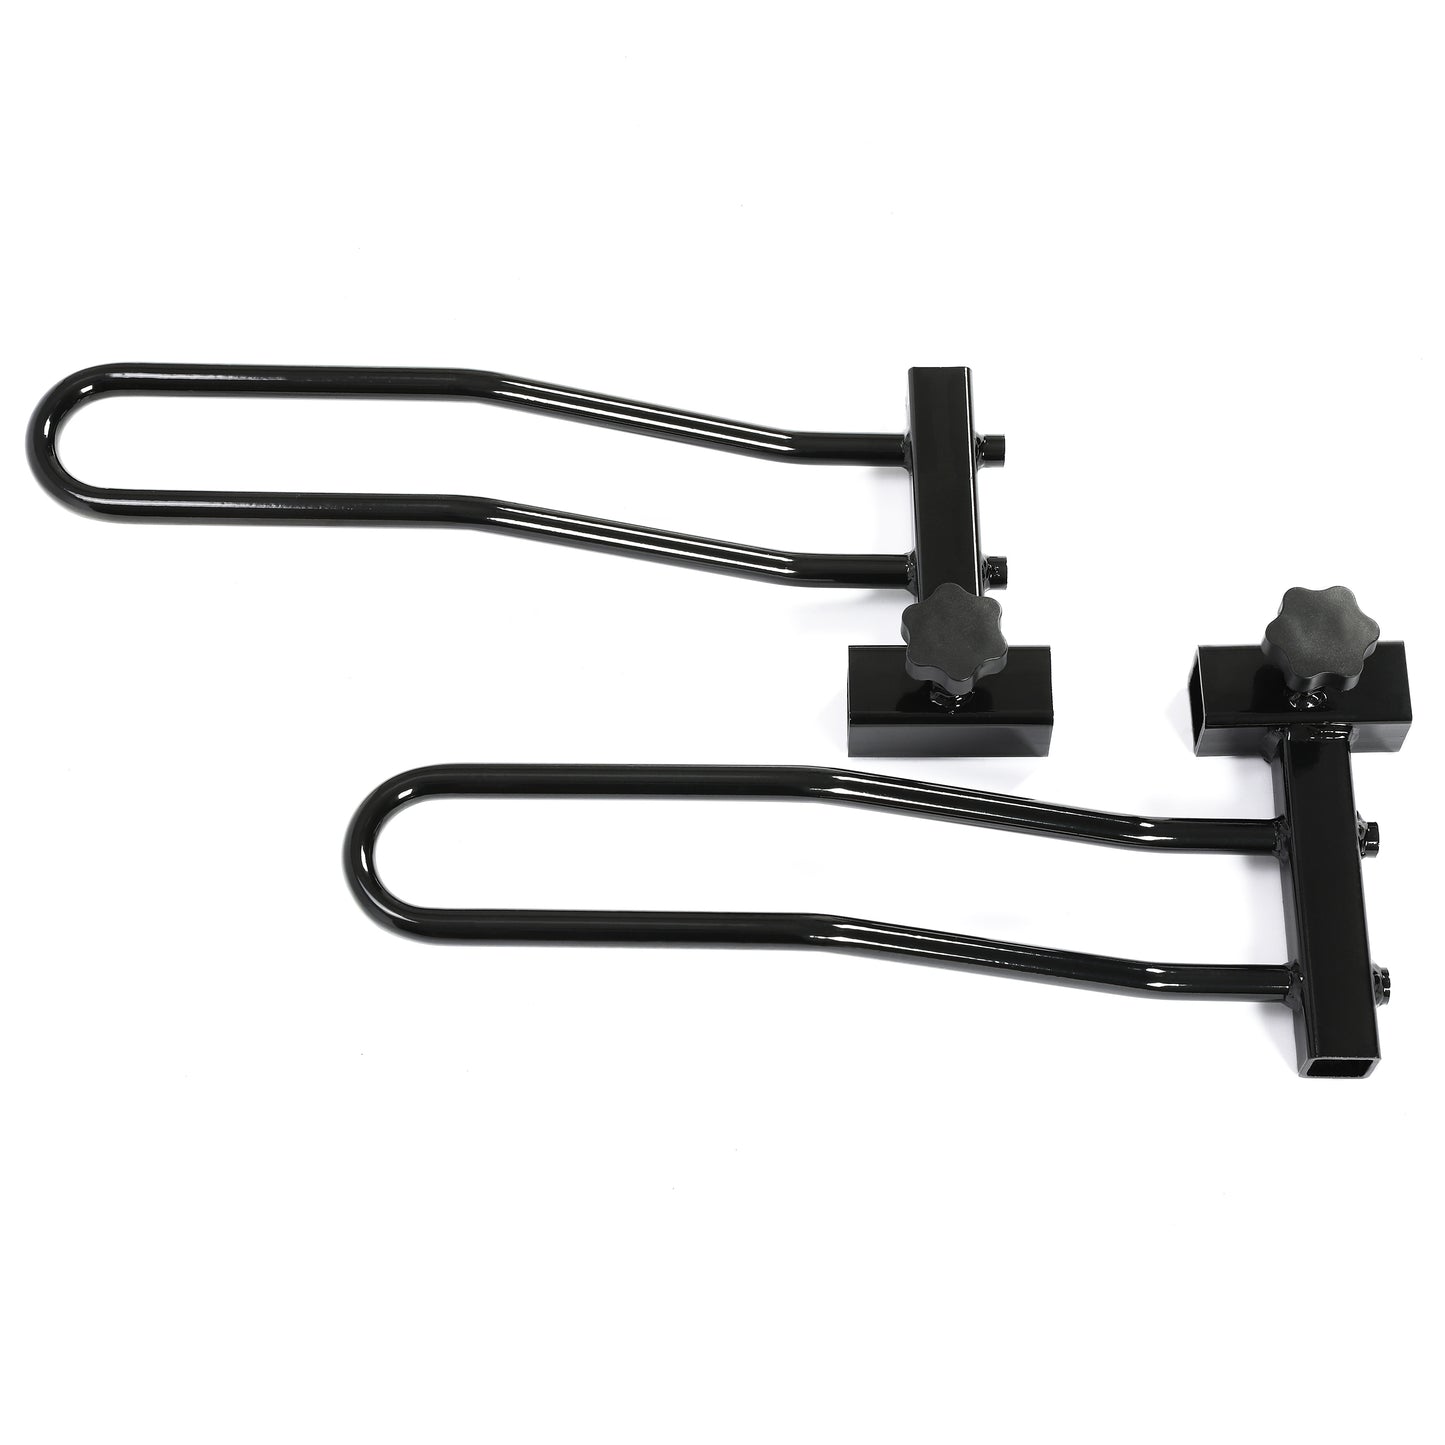 Bike Platform Style Electric Bicycle Hitch Mount Carrier Rack